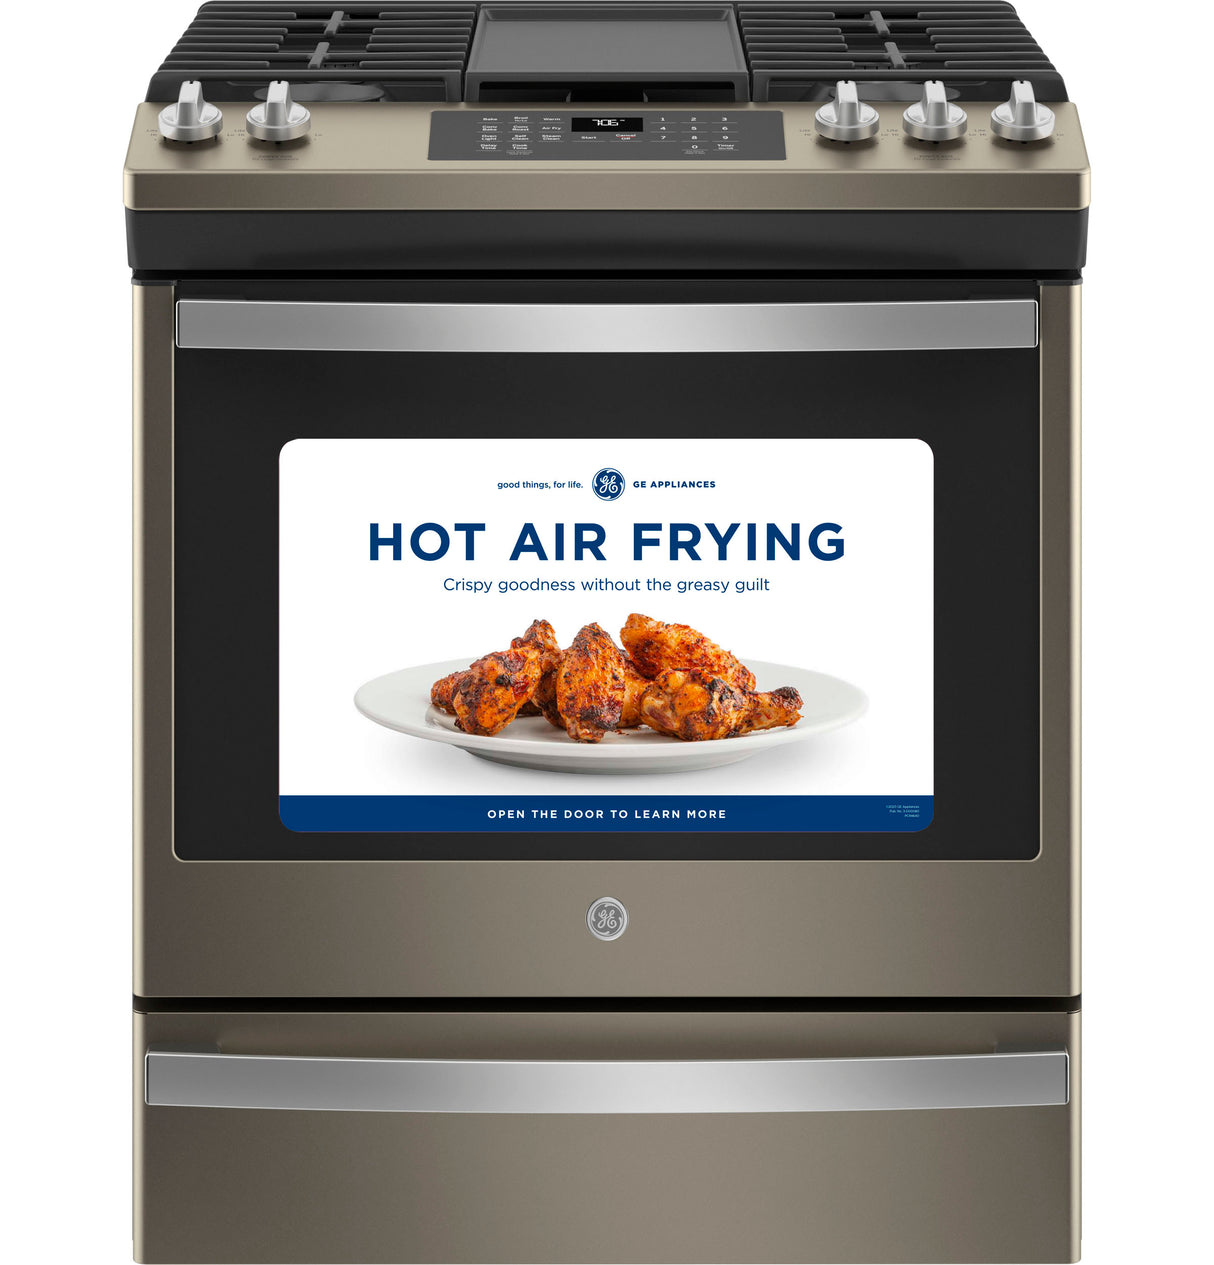 GE(R) 30" Slide-In Front-Control Convection Gas Range with No Preheat Air Fry - (JGS760EPES)